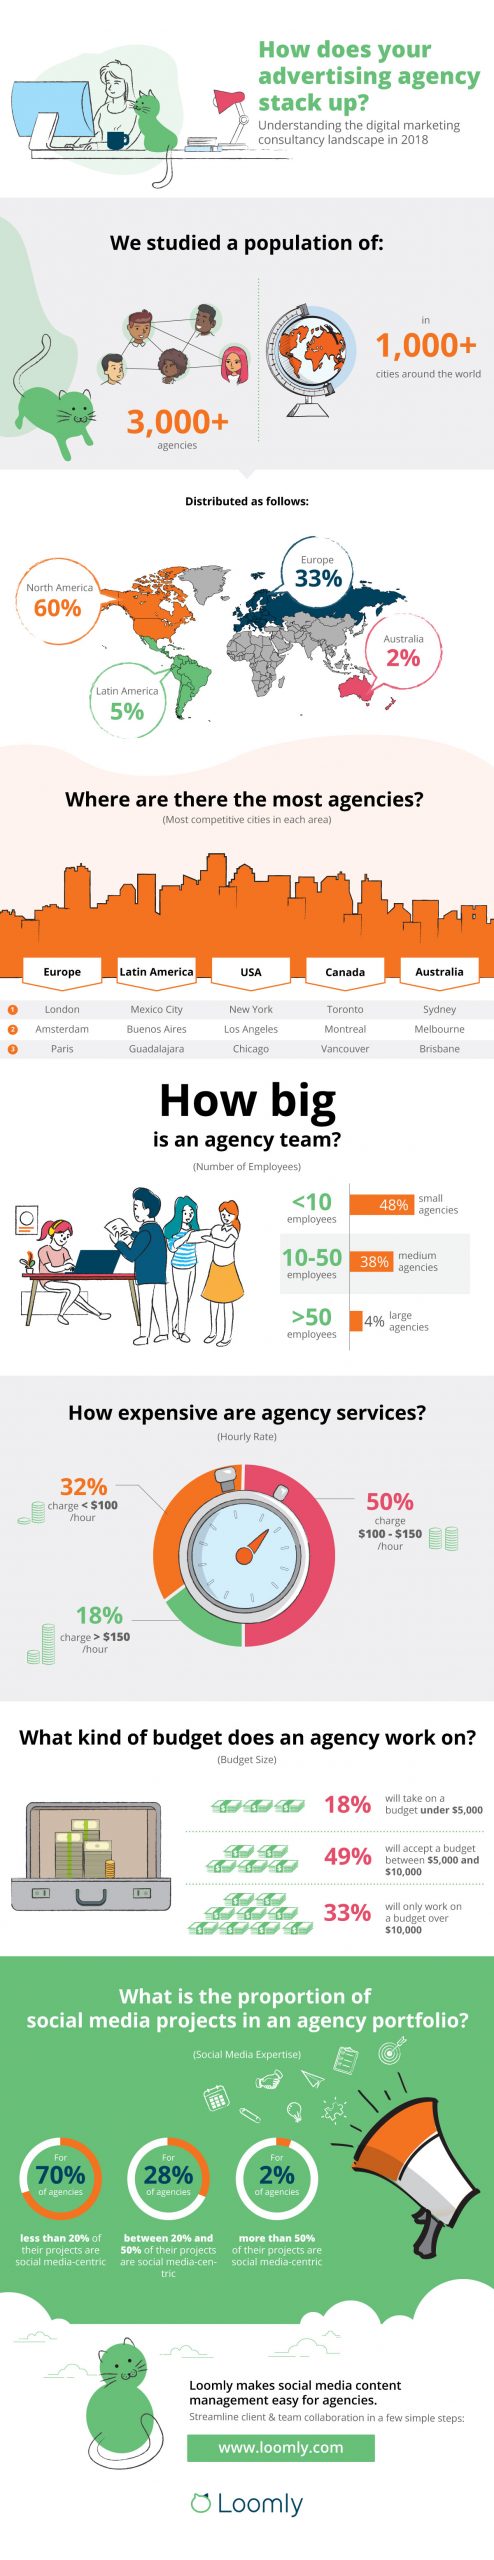 marketing agency infographic advertising agency 2018 infographic